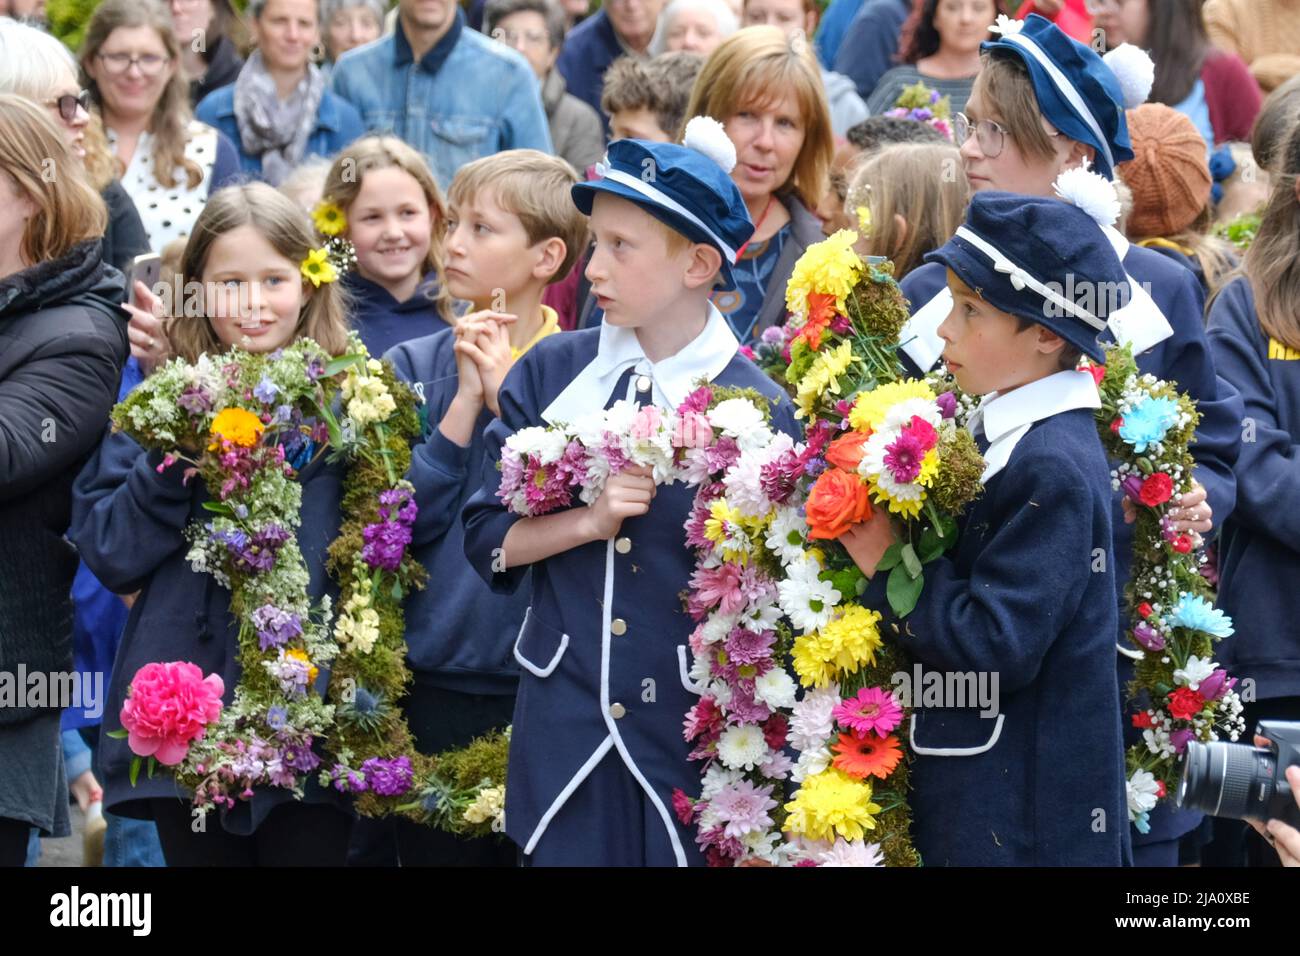 Bisley, Glos, UK. 26th May, 2022. Children from the Blue Coat school dressed in antique costumes are led through the village in a colourful procession. The tradition of dressing the wells in flowers was started in 1863 by the Vicar the Reverend Keble. The procession from the Church of England school takes place on Ascension Day each year. Credit: JMF News/Alamy Live News Stock Photo